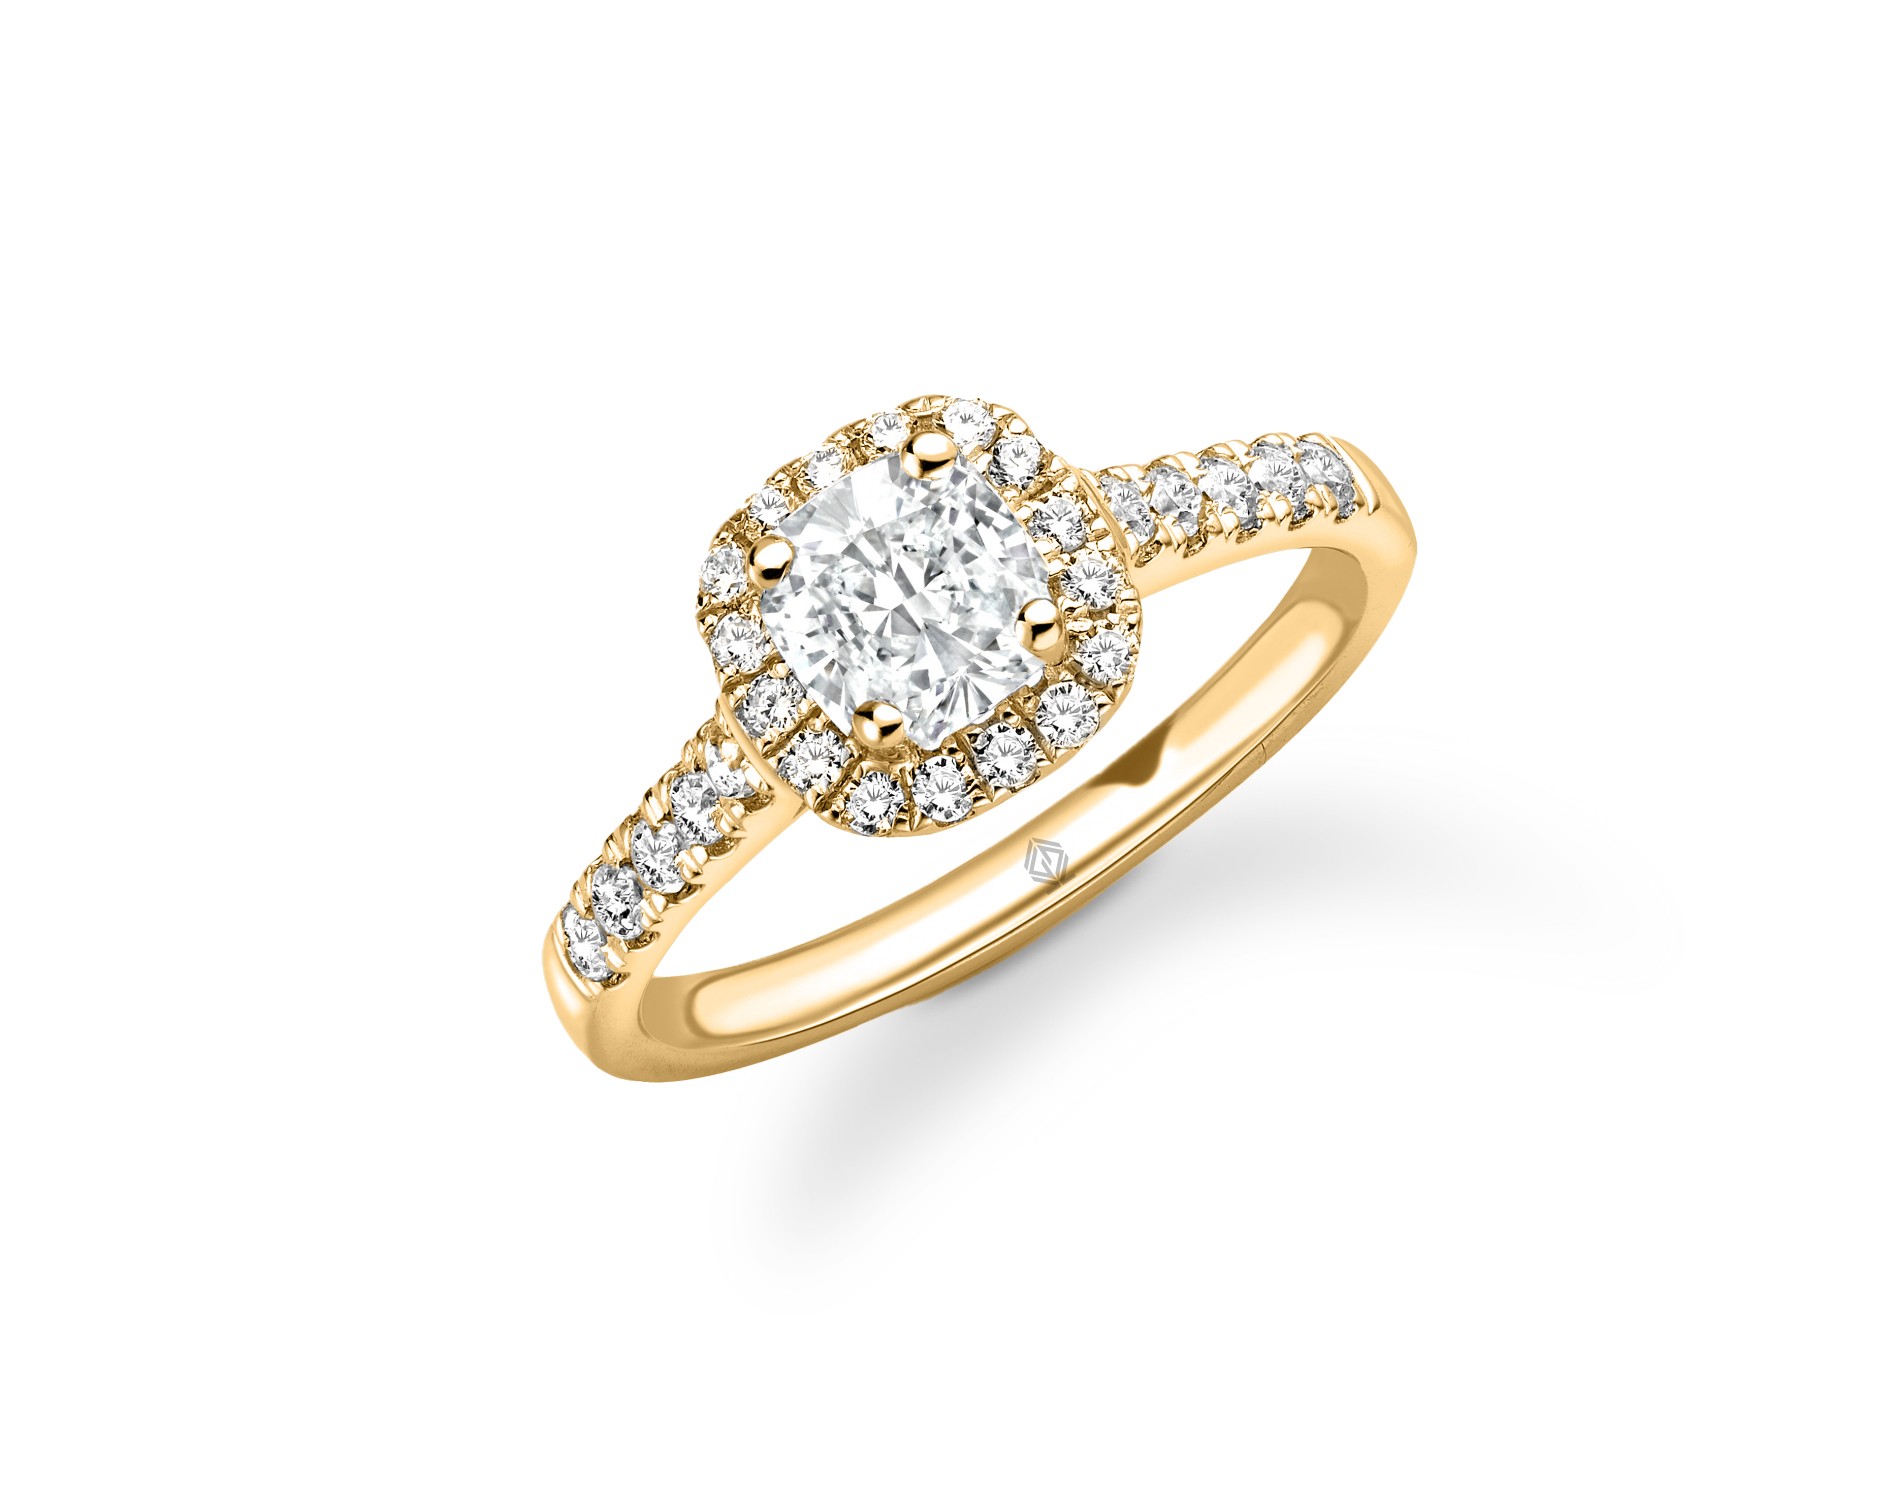 18K YELLOW GOLD CUSHION SHAPED HALO DIAMOND ENGAGEMENT RING WITH SIDE STONES IN PAVE SET